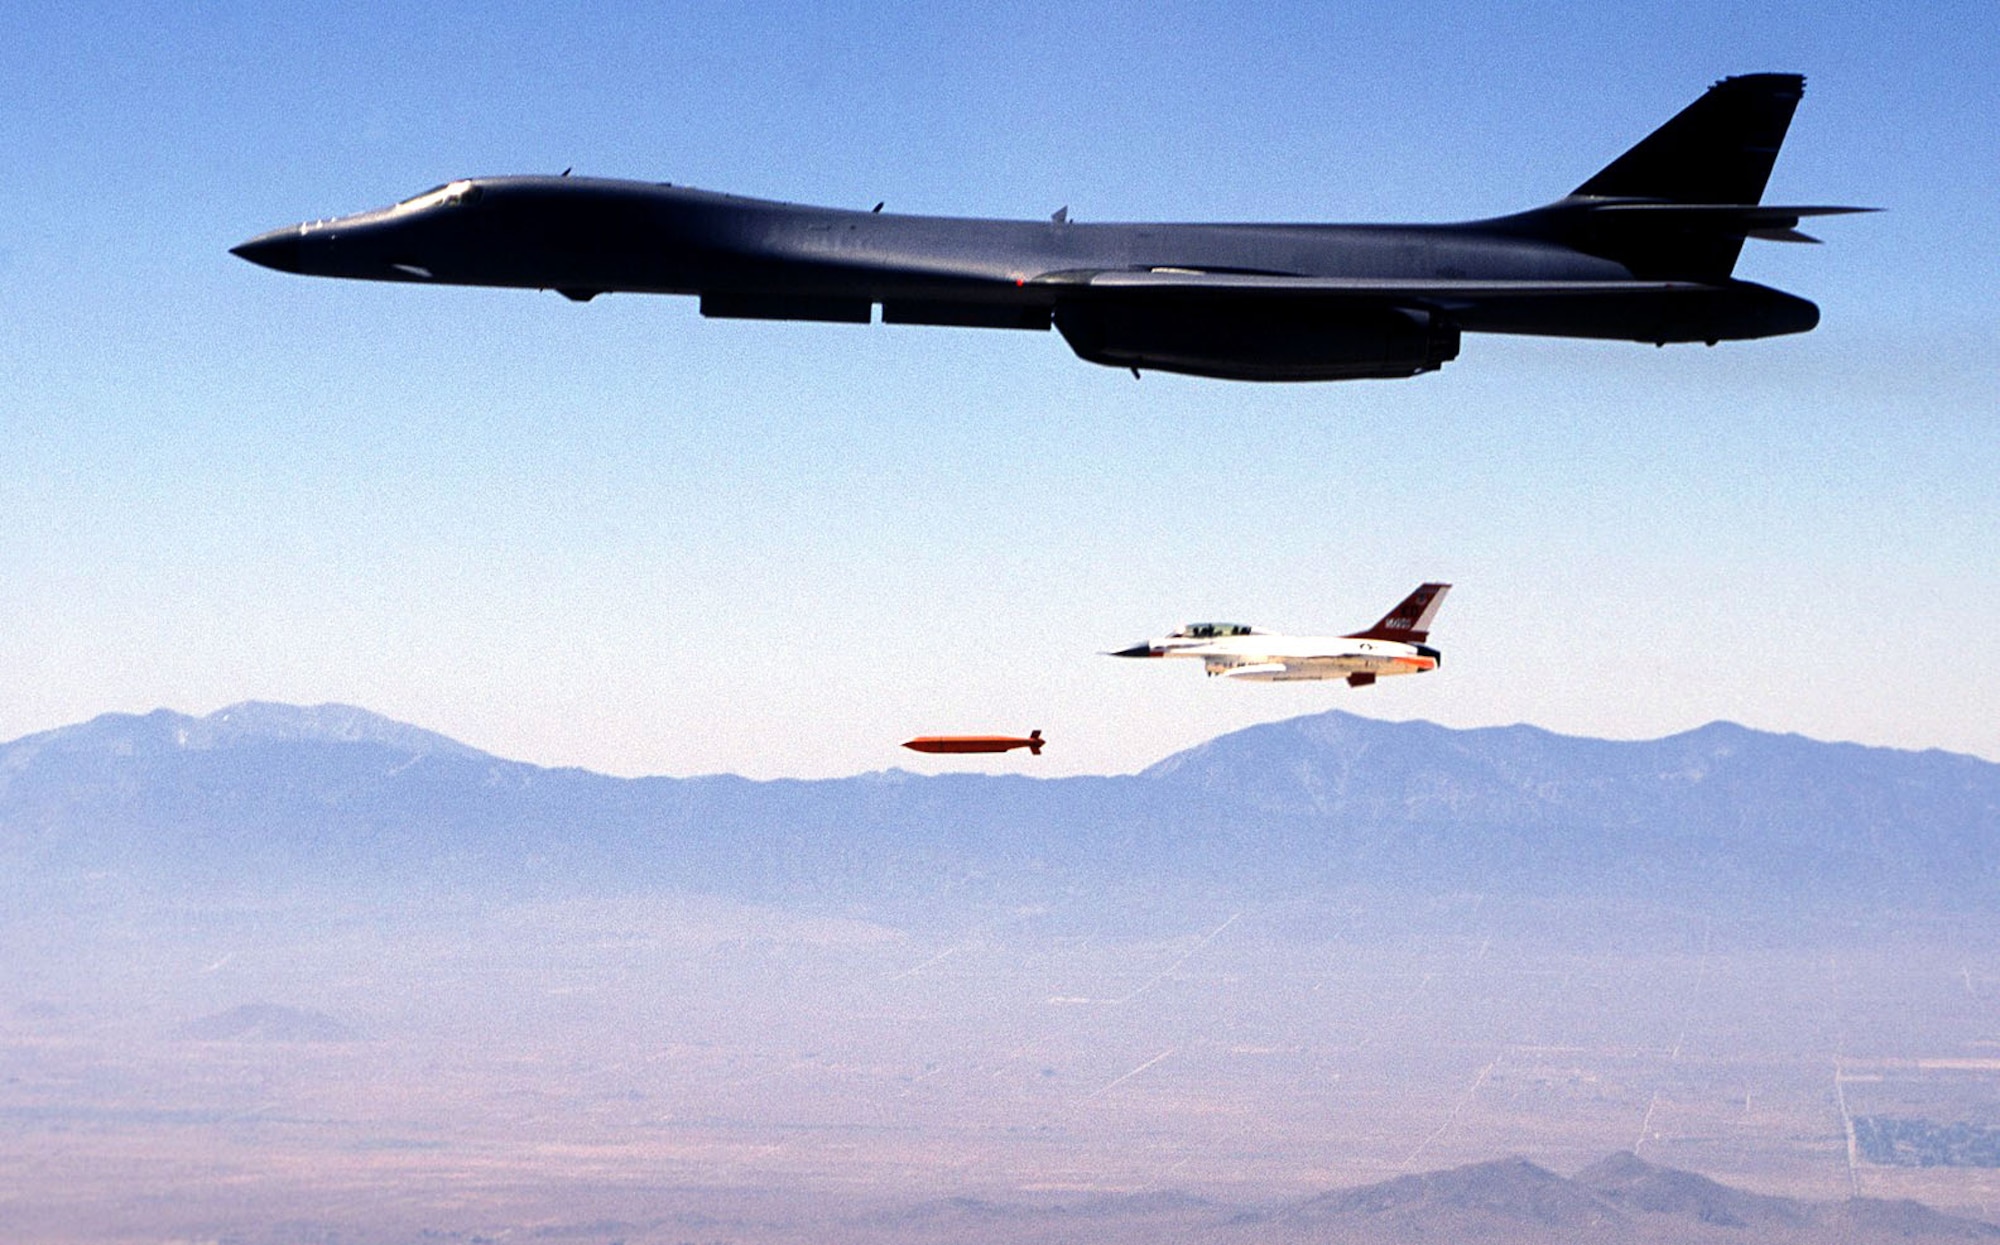 EDWARDS AIR FORCE BASE, Calif. -- A B-1B Lancer from the global power bomber combined test force here drops a Joint Standoff Weapon during a recent test mission.  The test marked the first time the JSOW has been dropped from the long-range bomber.  (U.S. Air Force photo by Steve Zapka)